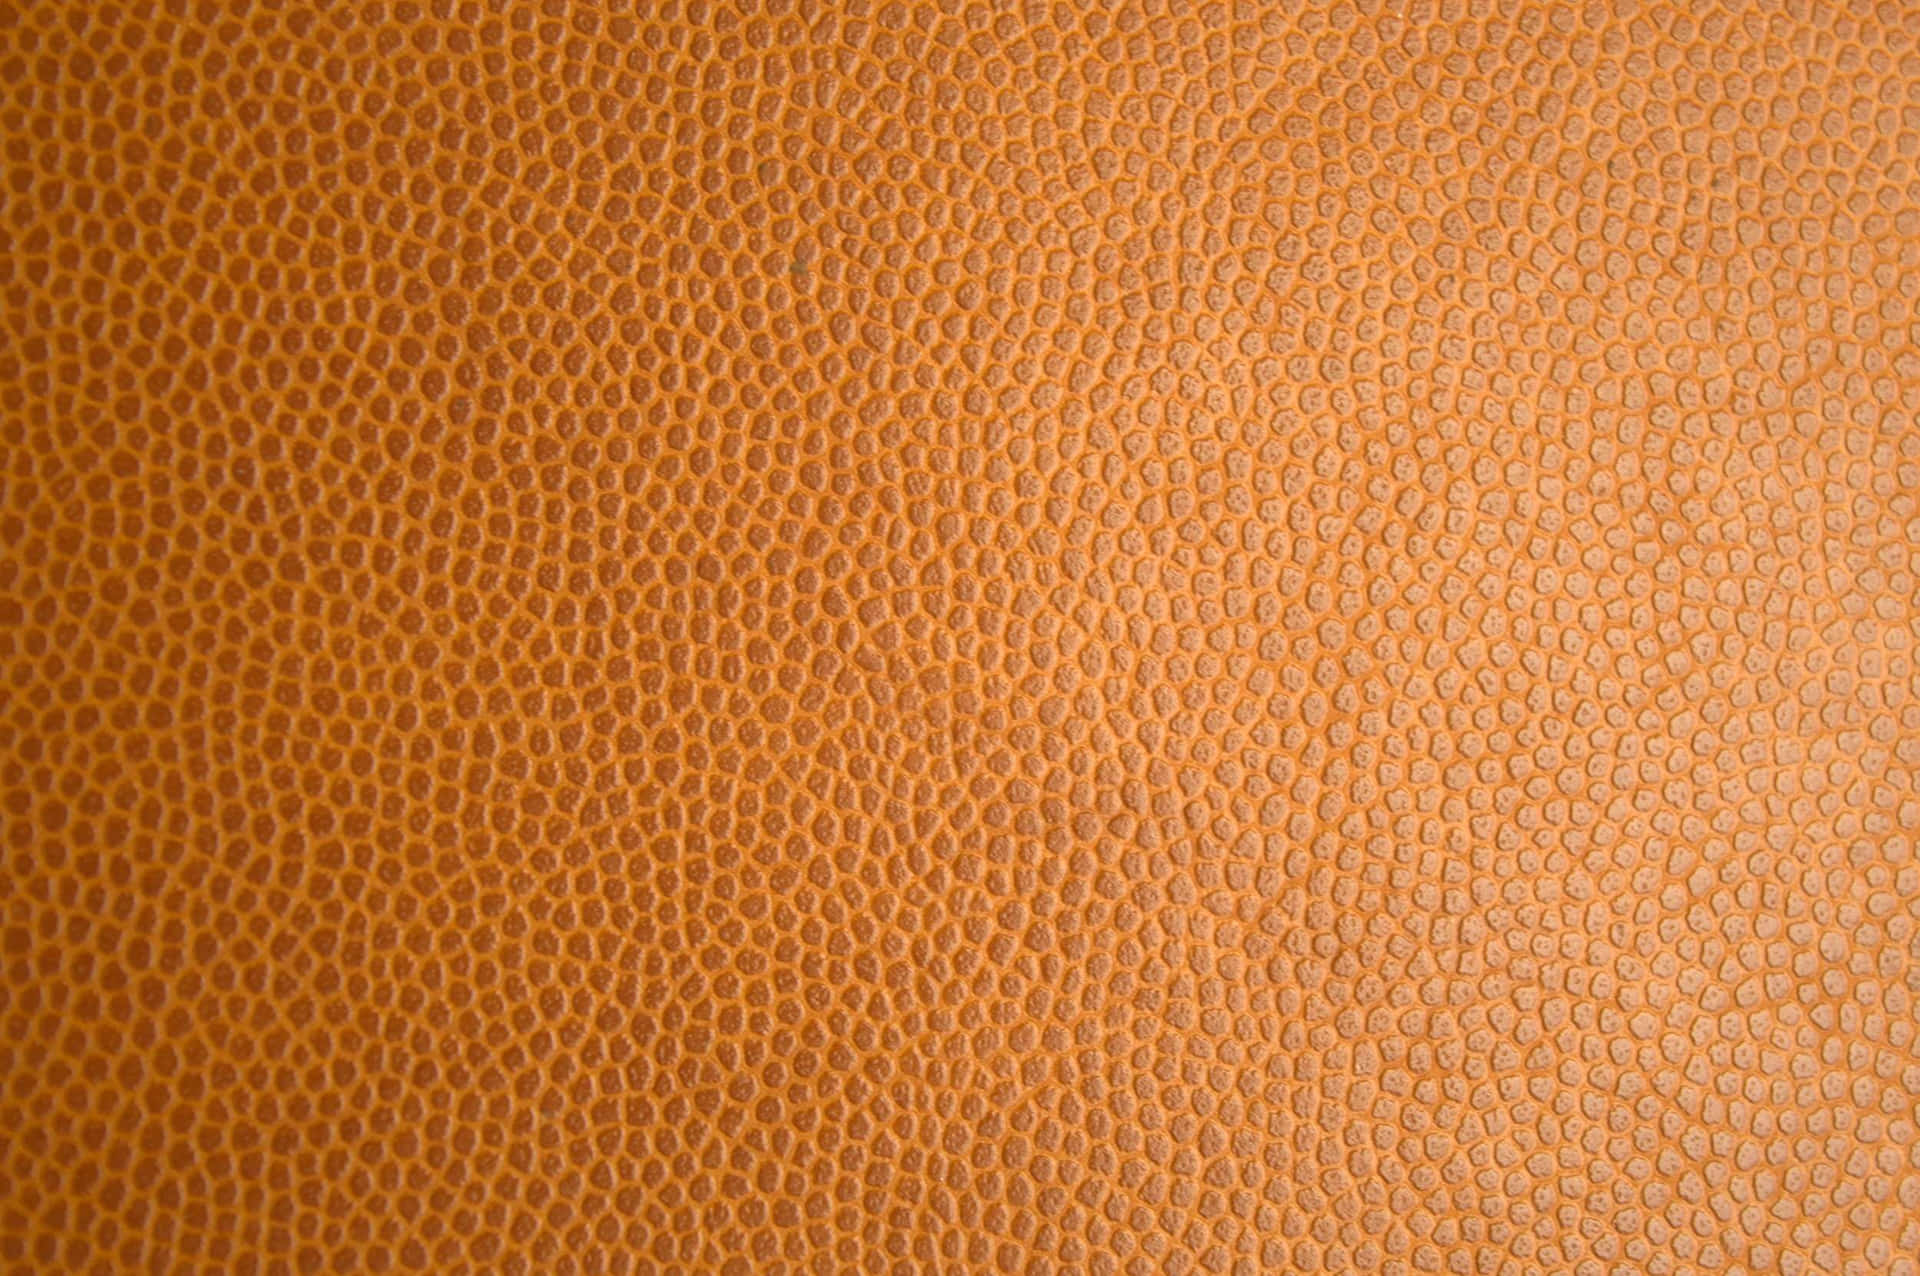 Authentic Light Brown Leather Texture Wallpaper